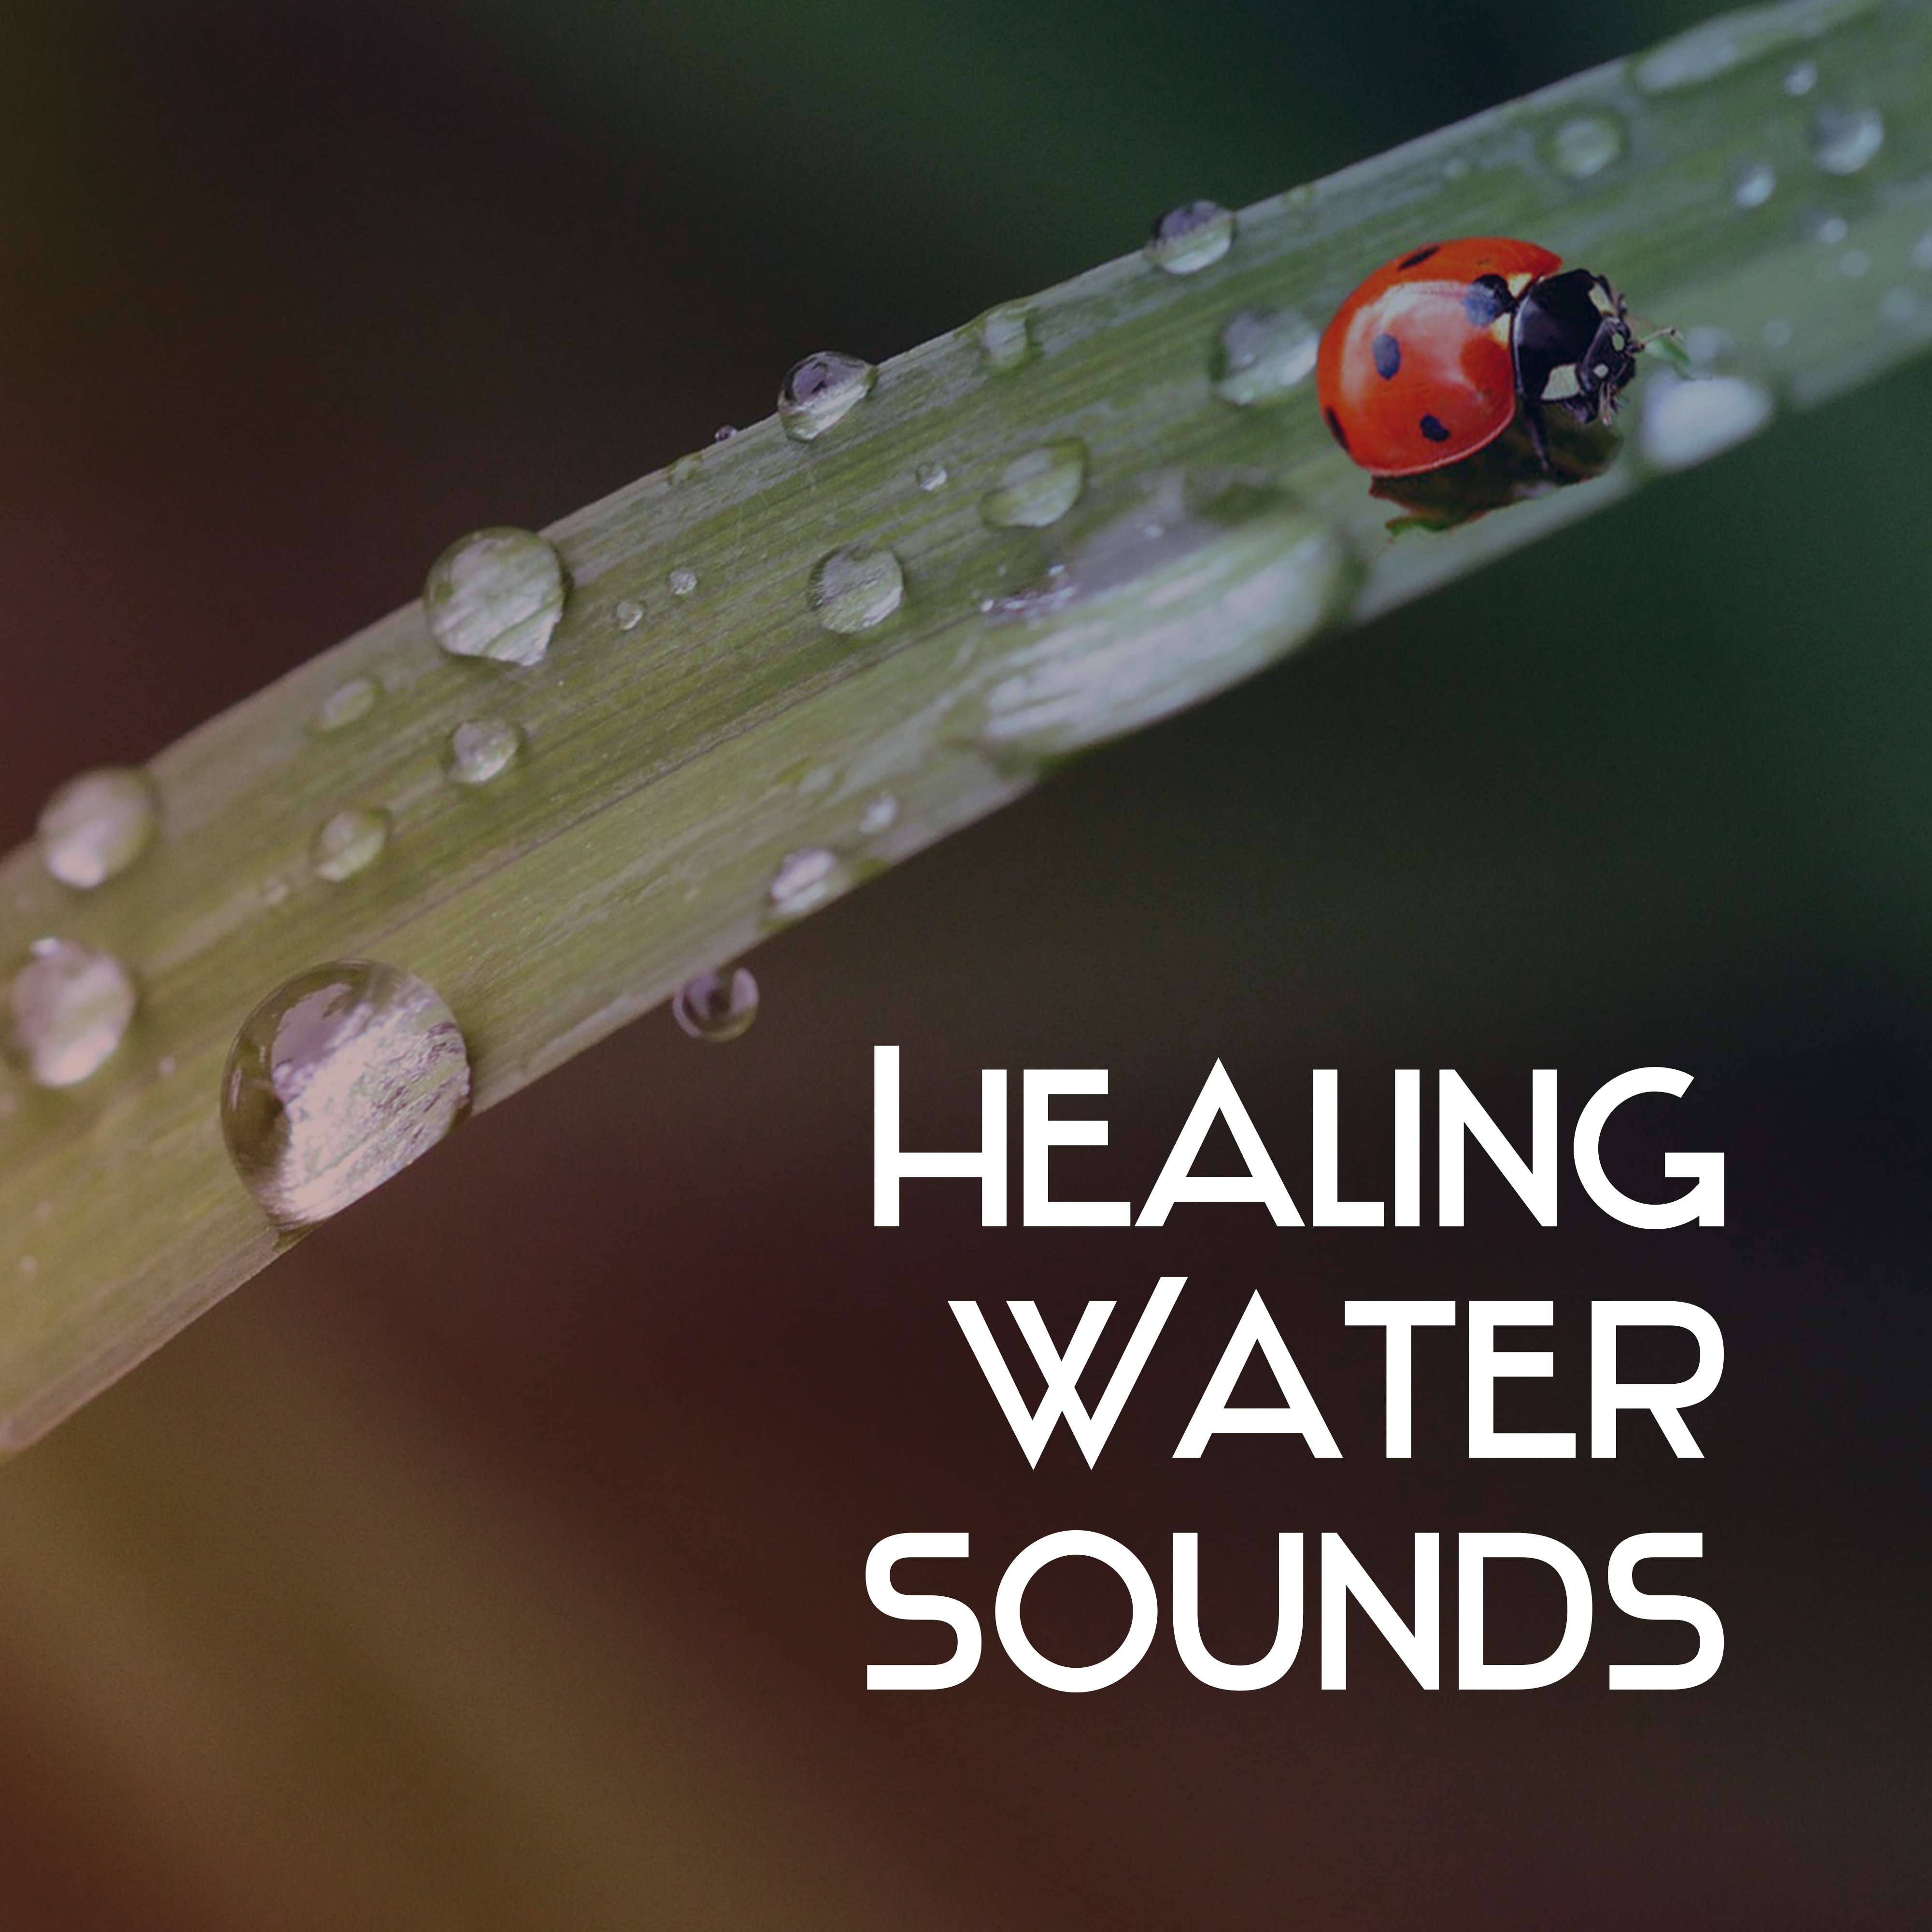 Healing Water Sounds – Nature Relaxation, Soothing Waves, Calm Mind, Peaceful Sounds